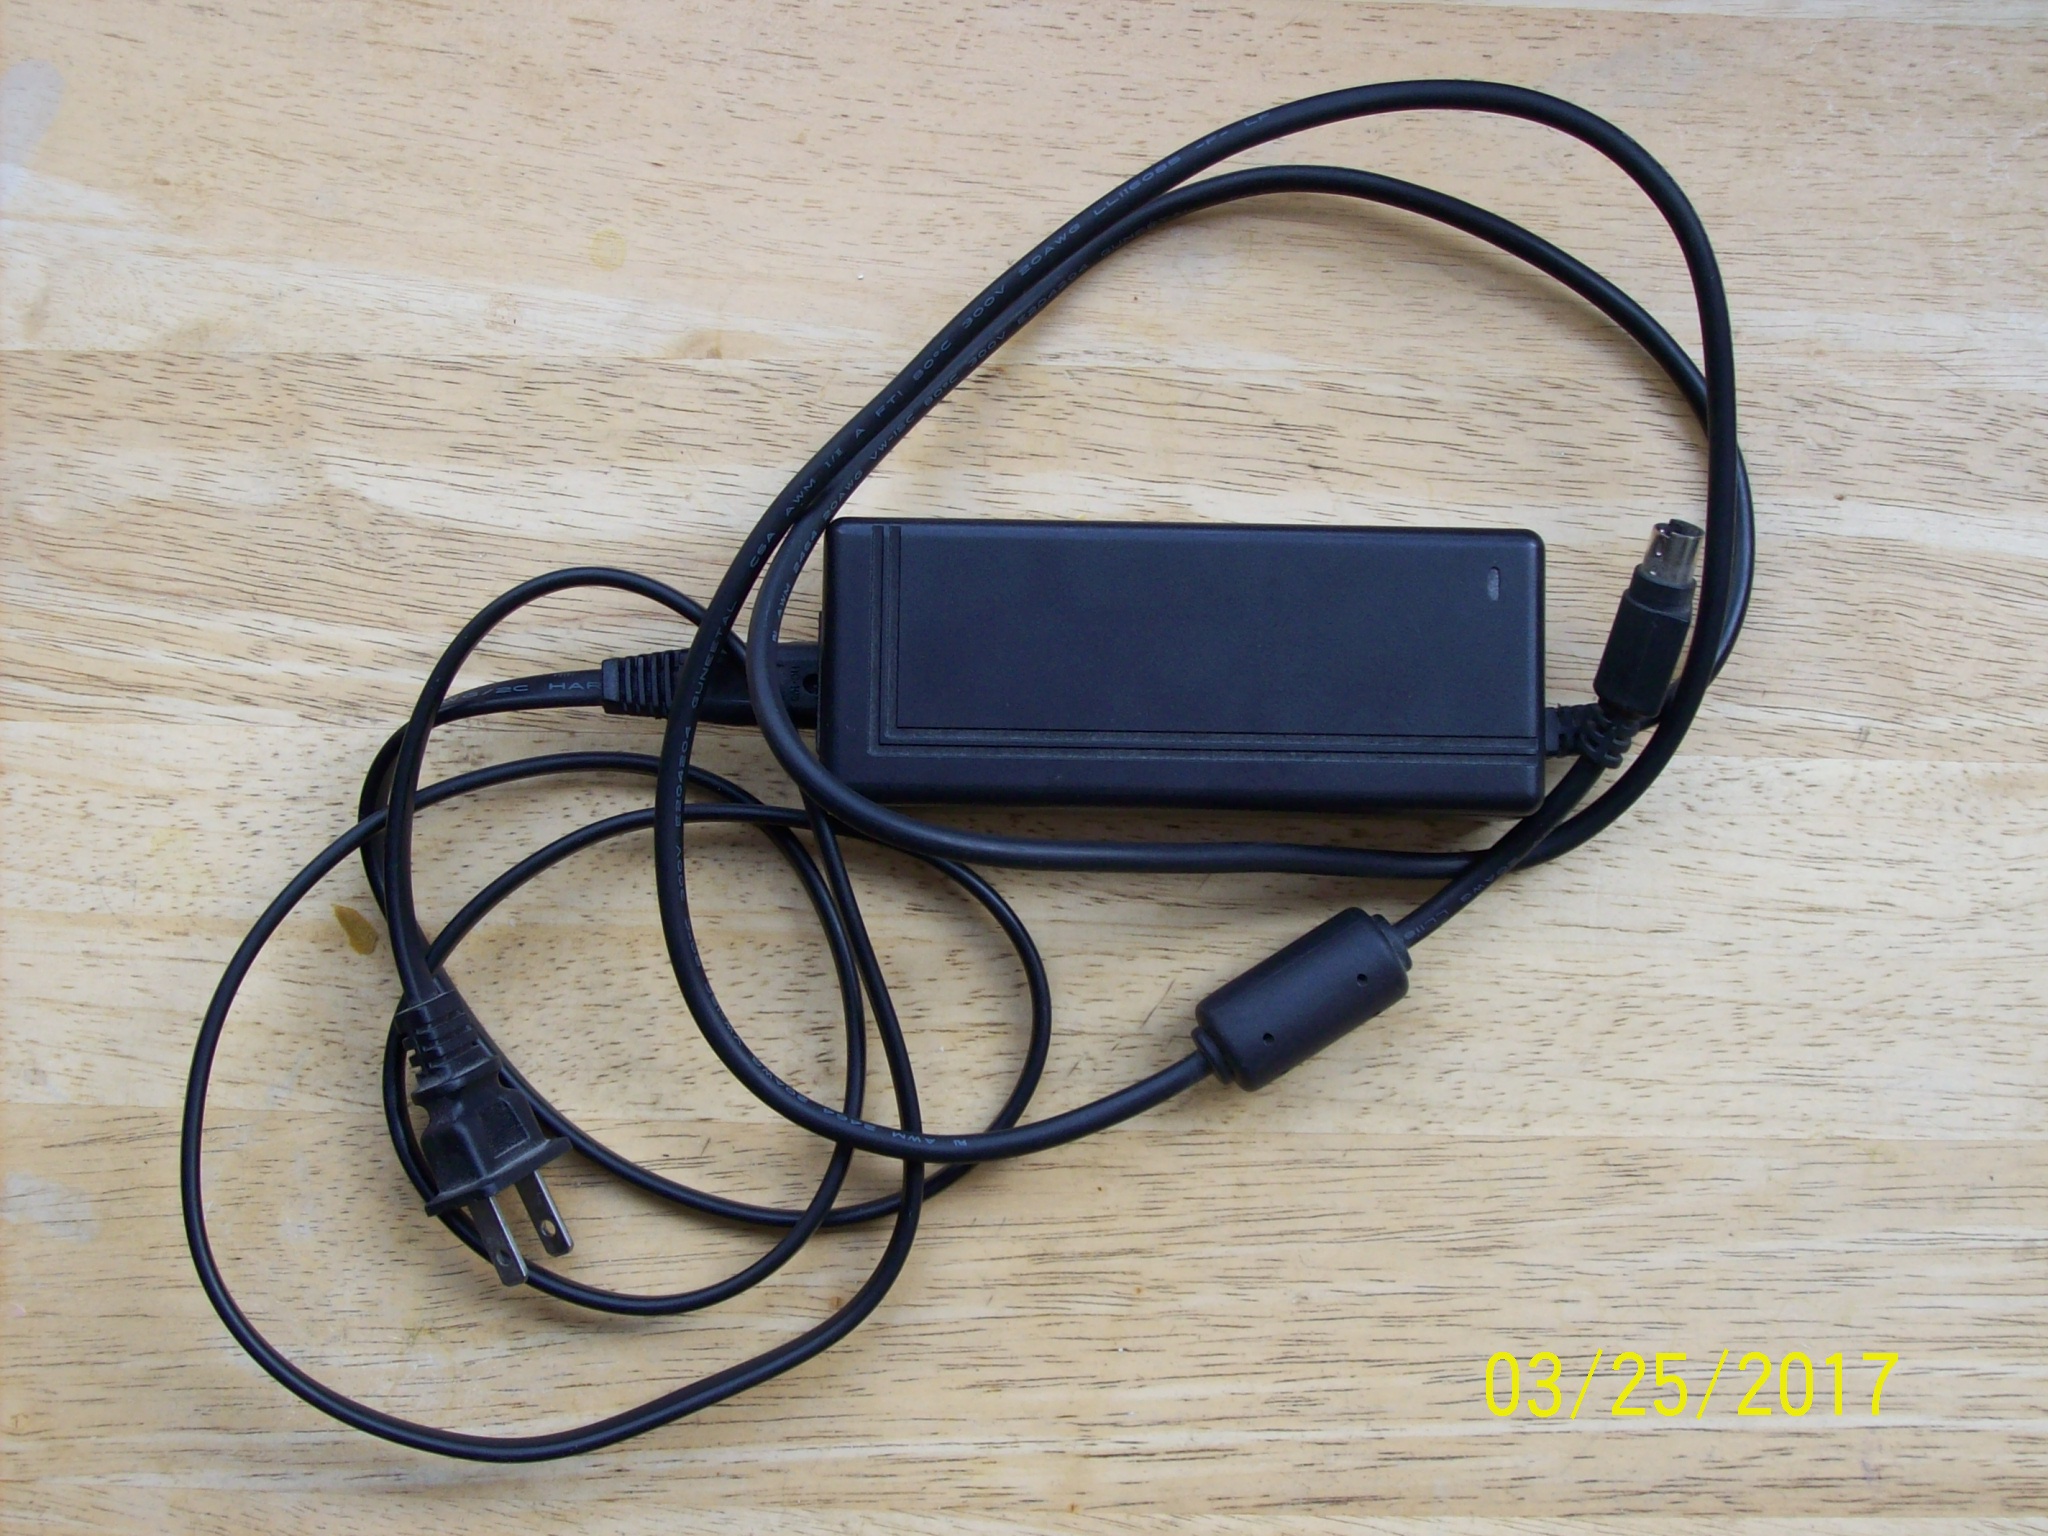 Switching Adapter-JHS-Q05/12-S335- Output: 12v 2a/5v 2a